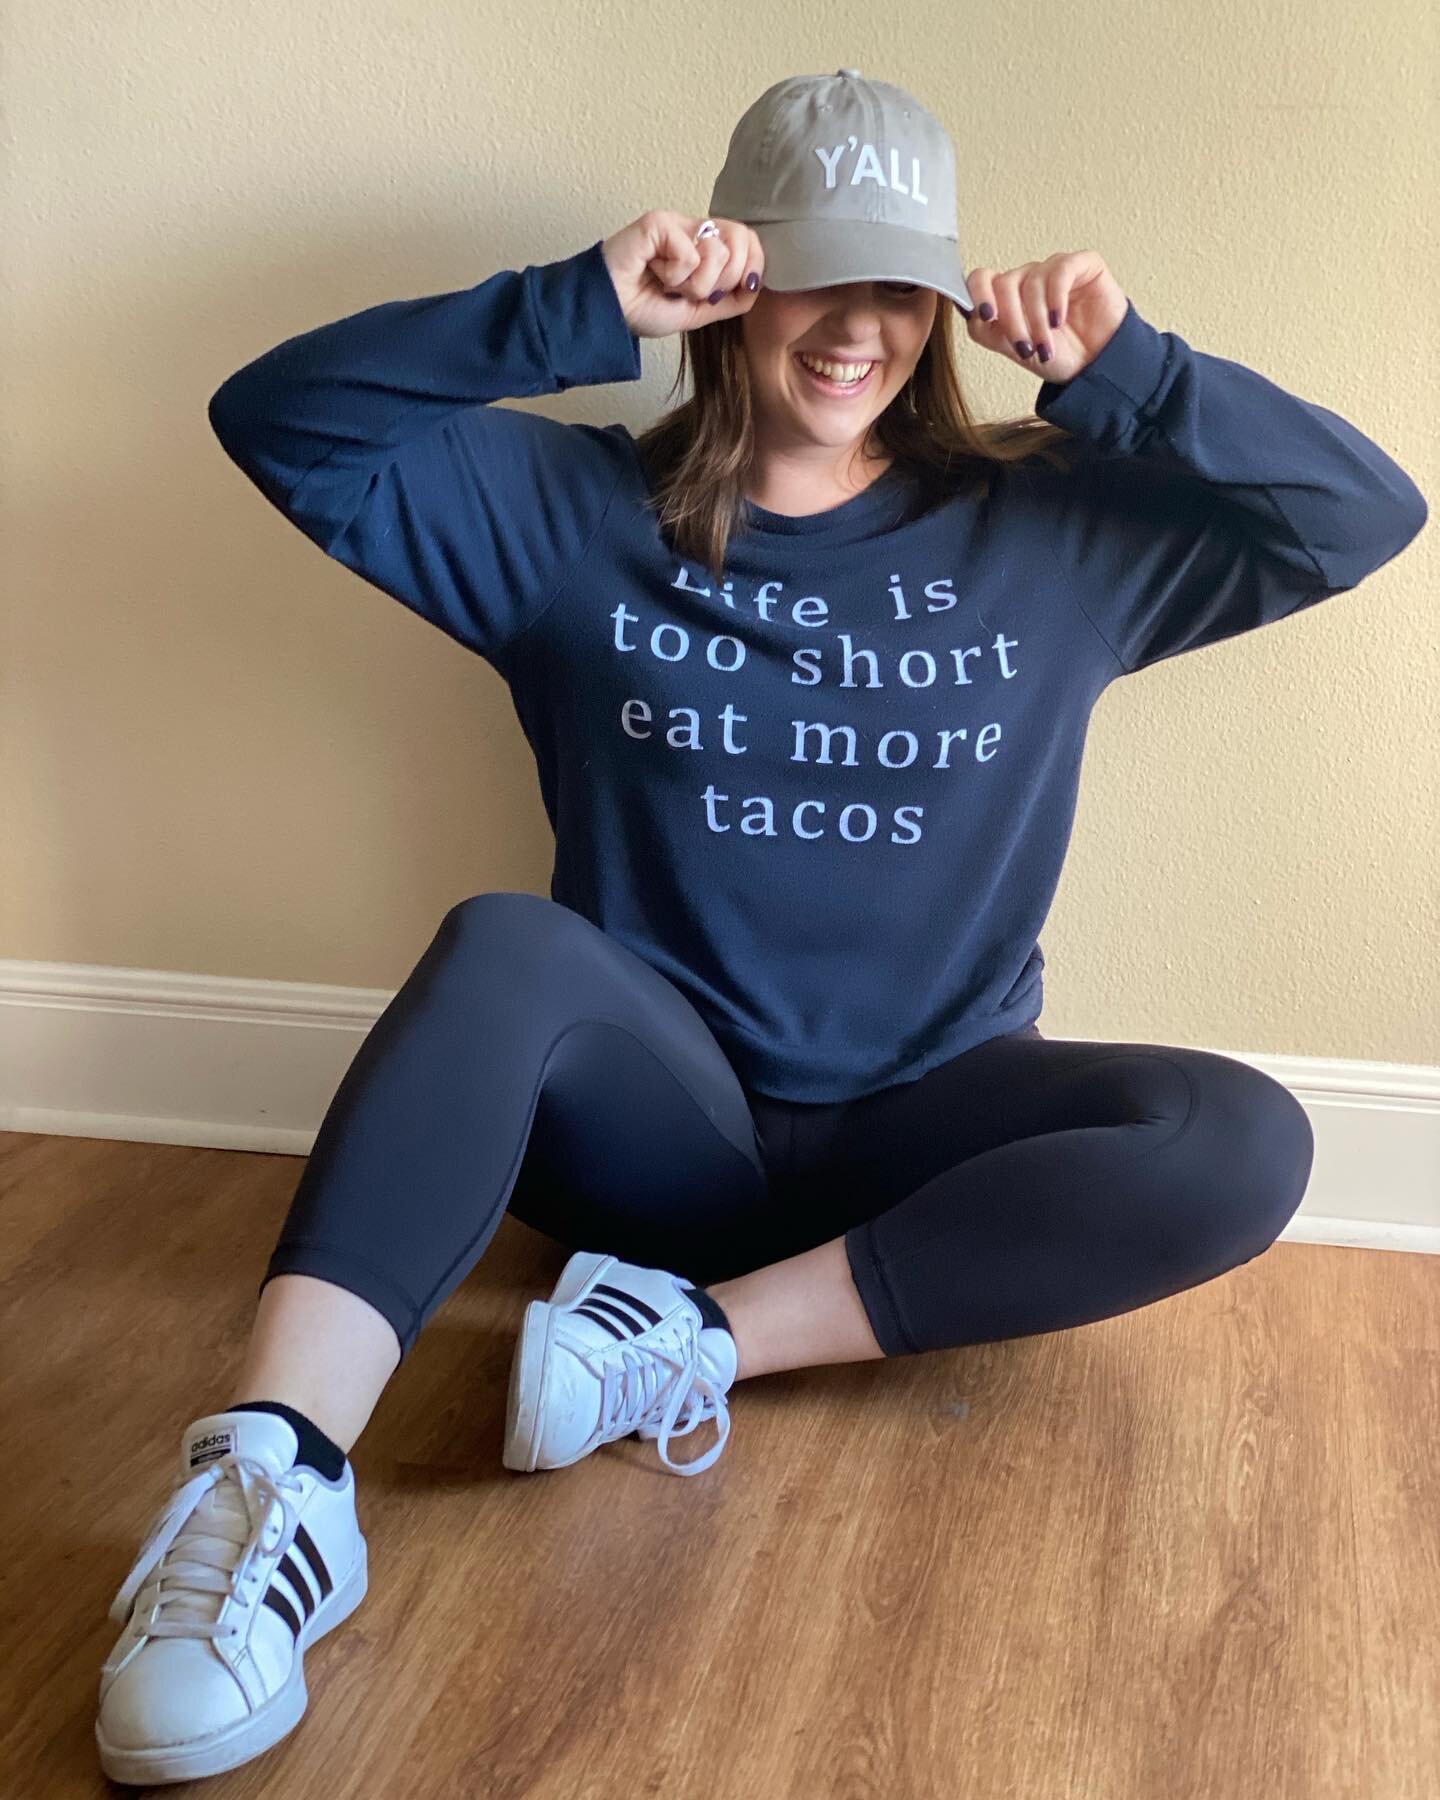 My Texas motto for Taco Tuesday🌮
(and everyday if we&rsquo;re being honest)